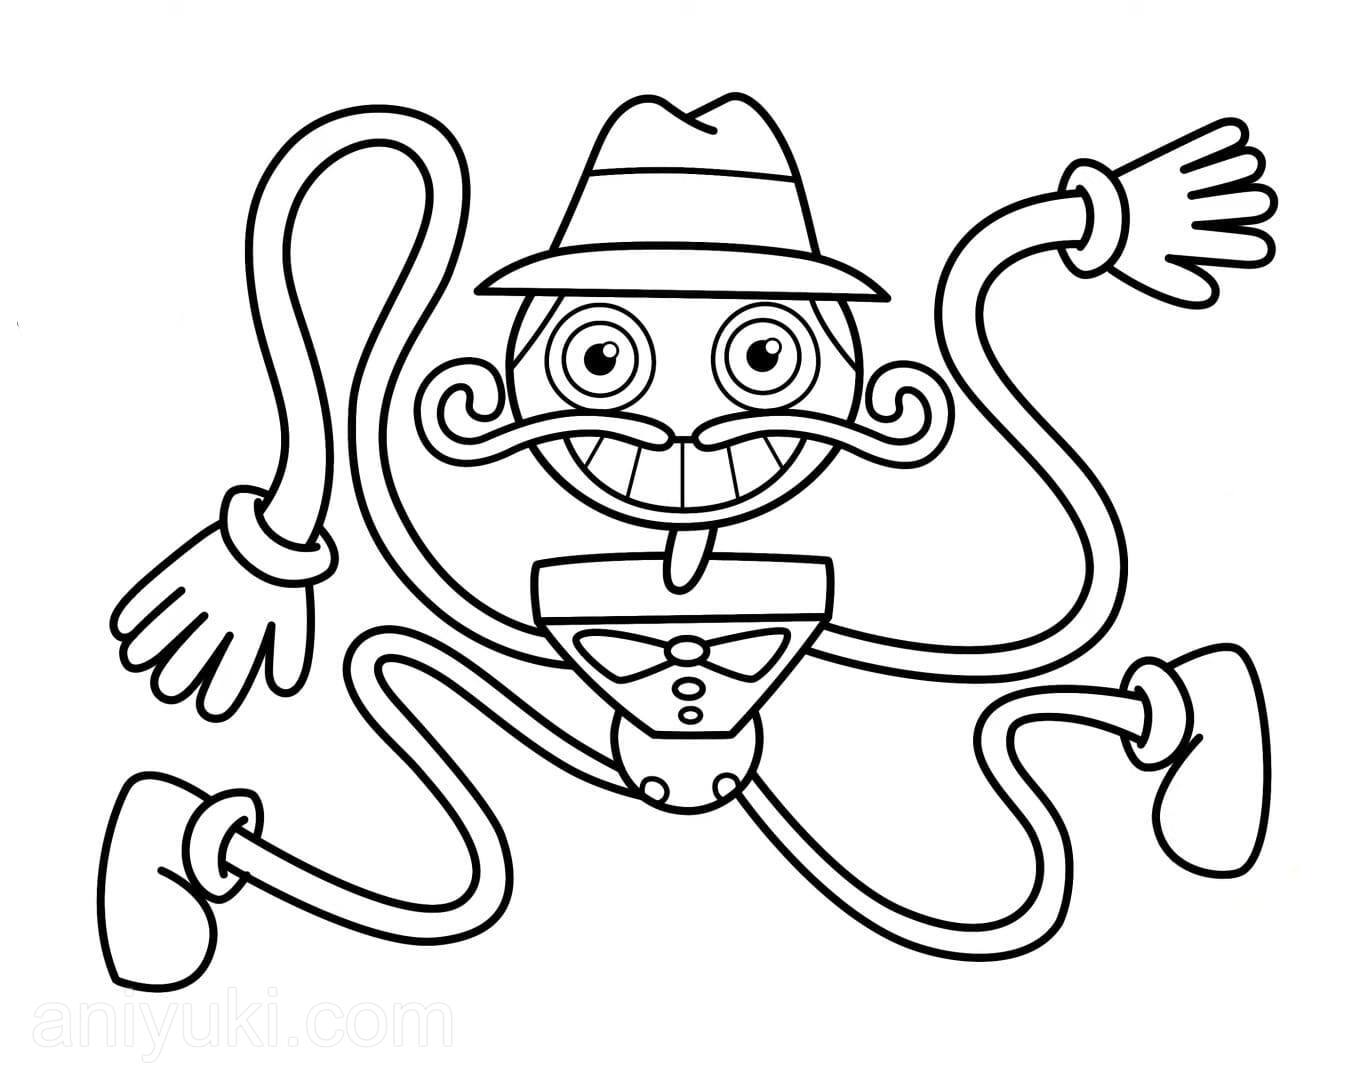 Ecstatic pippi play time coloring page